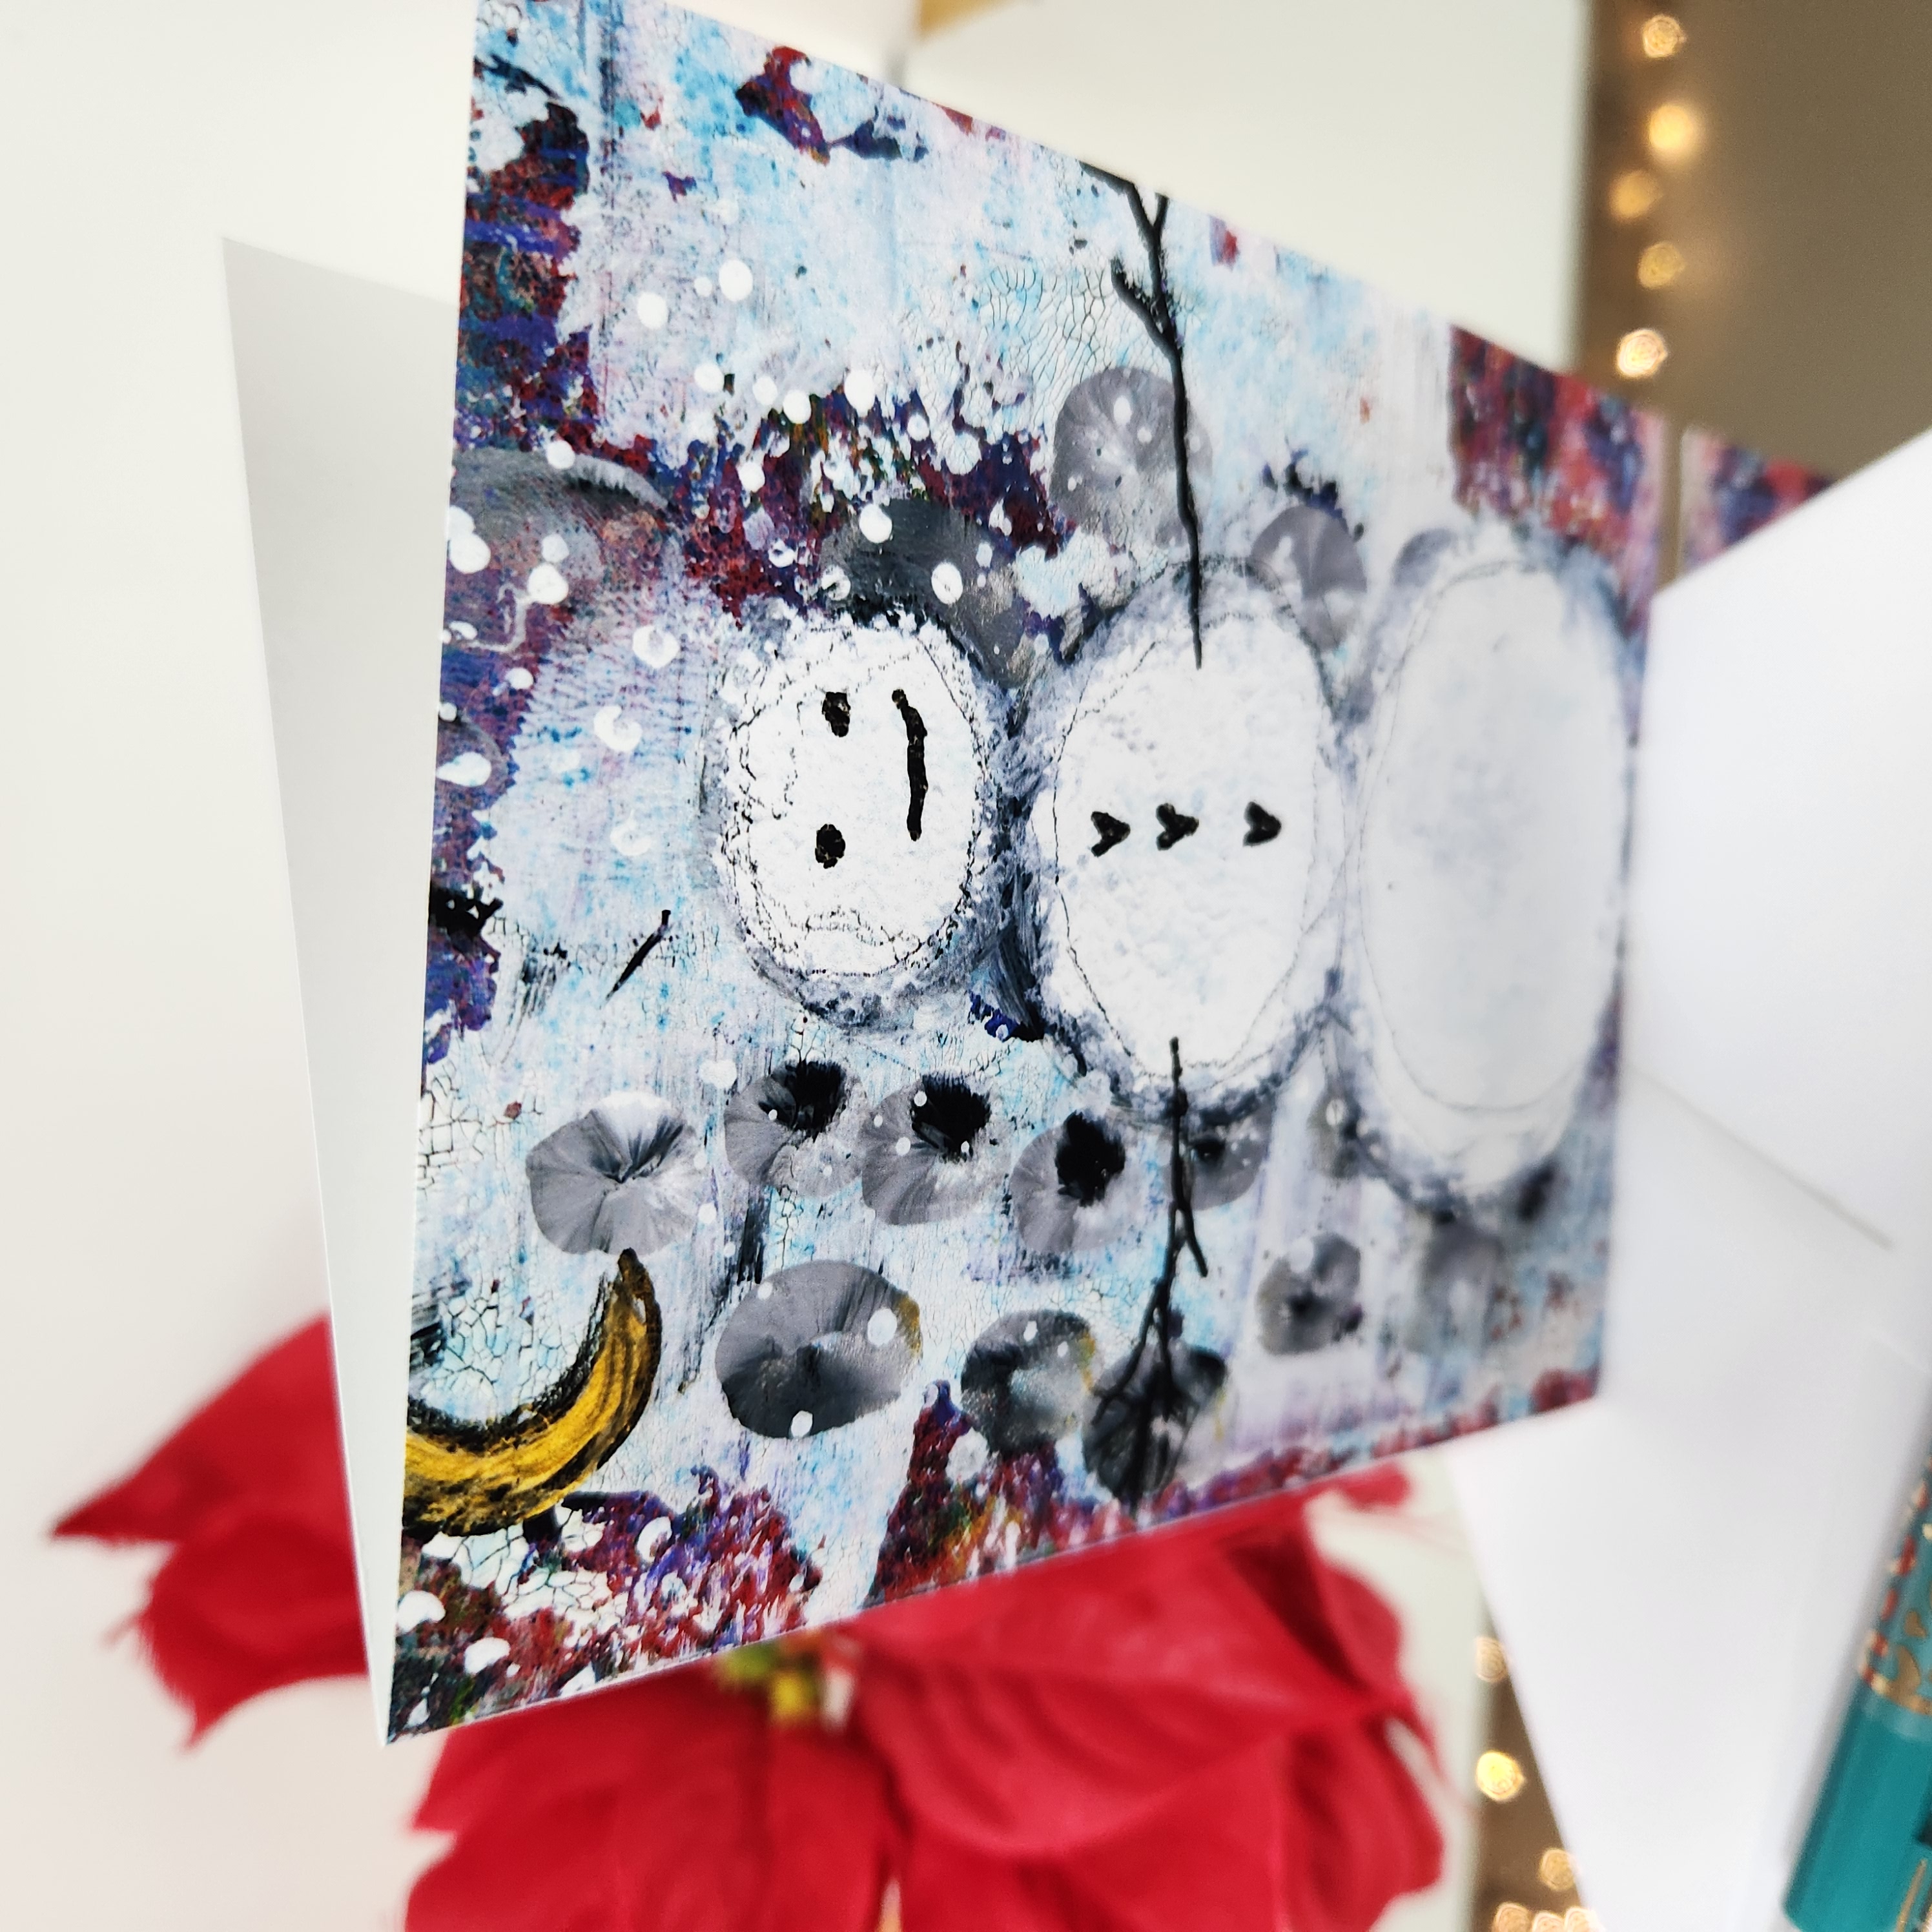 Chillin' - A2 size holiday greeting  card with snowman artwork. Patty Donahue artist